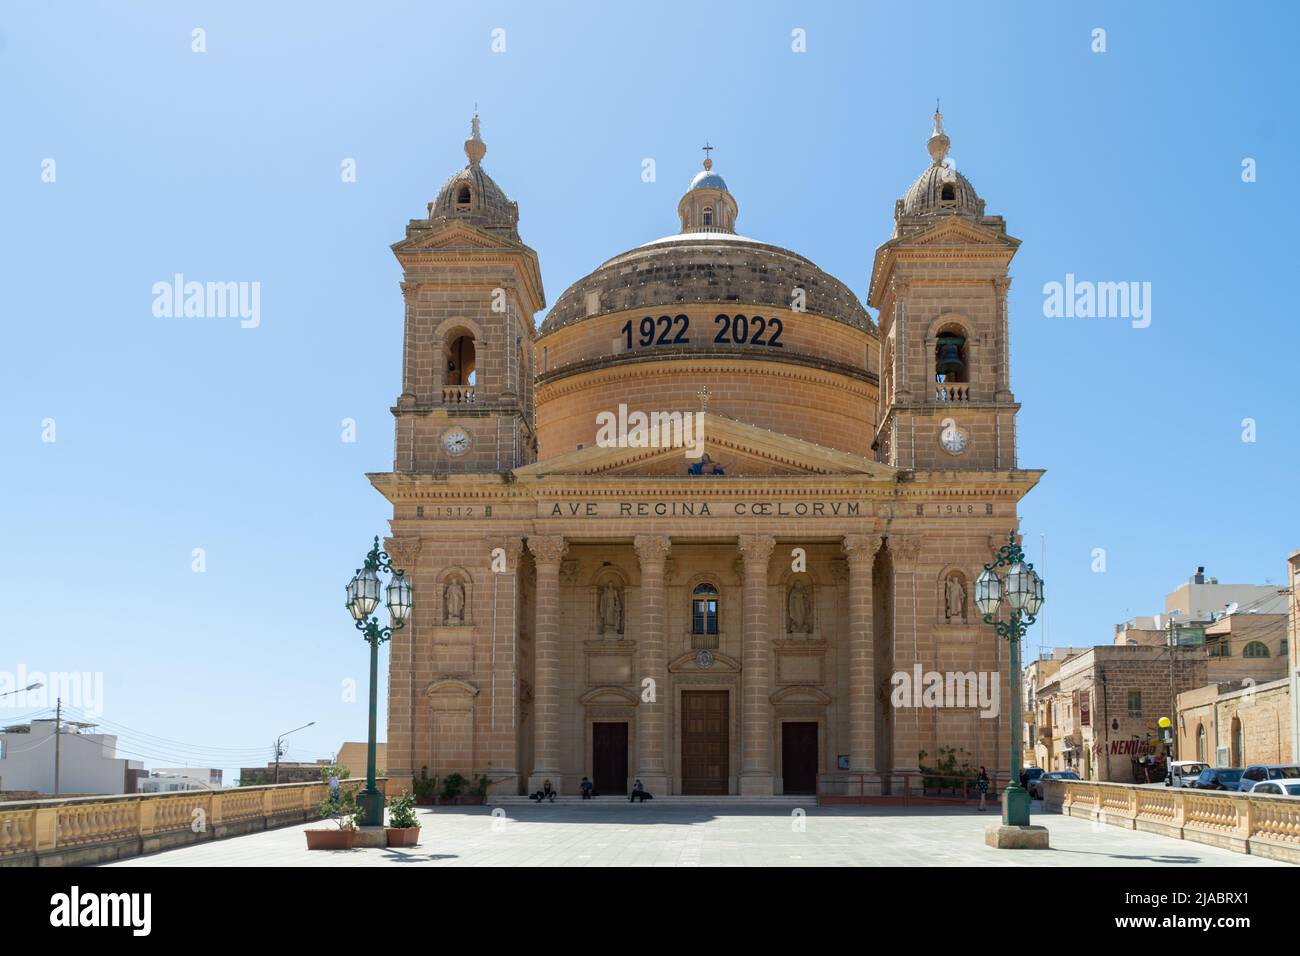 Msida, Malta - May 29th 2022: The Parish Church of the Assumption of the Blessed Virgin Mary into Heaven, built in the 20th century. Stock Photo